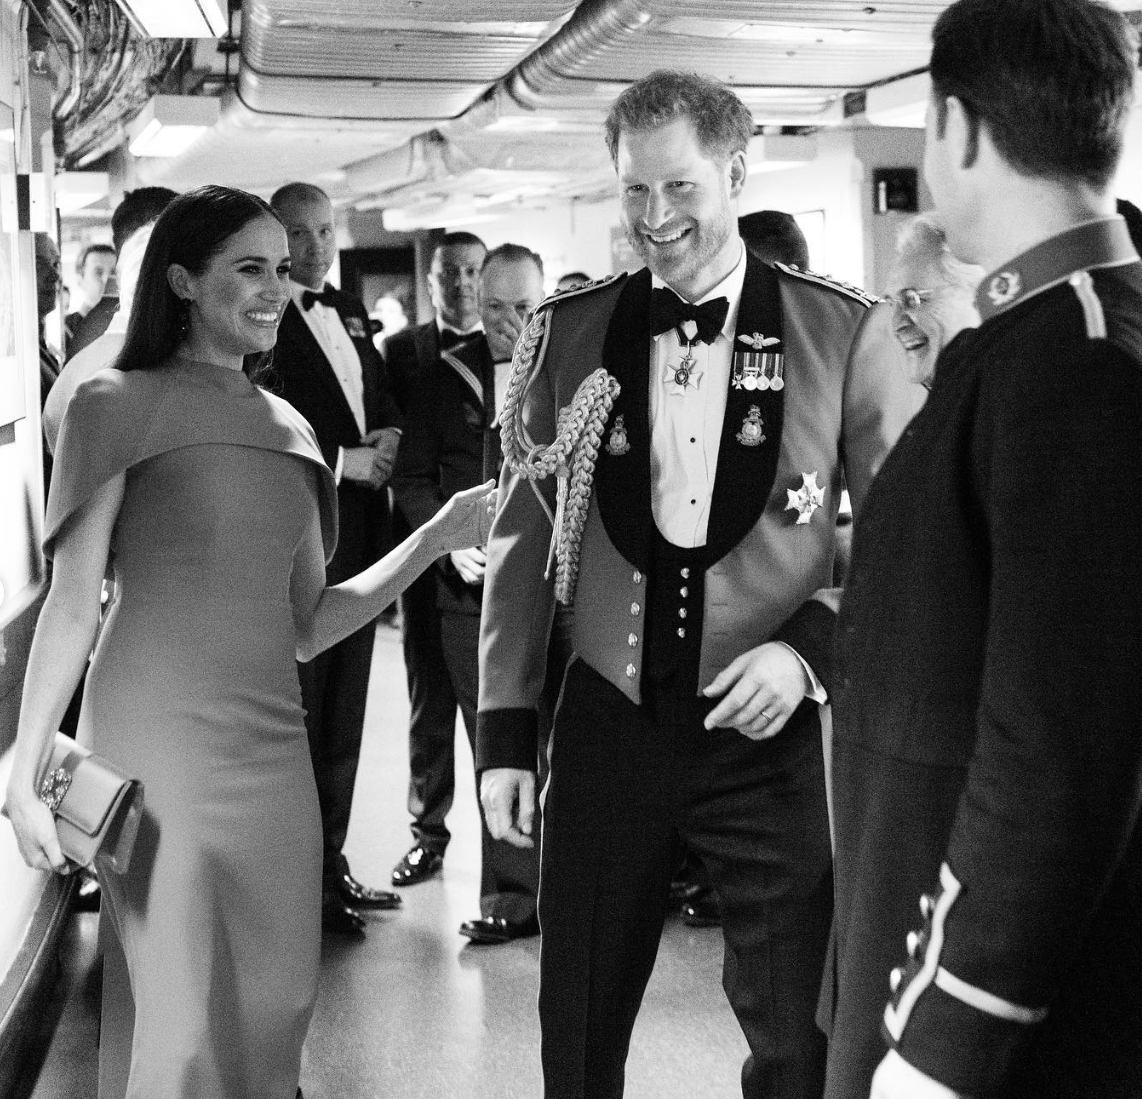 Meghan Markle and Prince Harry as seen in a March 7, 2020 Instagram post | Source: Instagram.com/sussexroyal